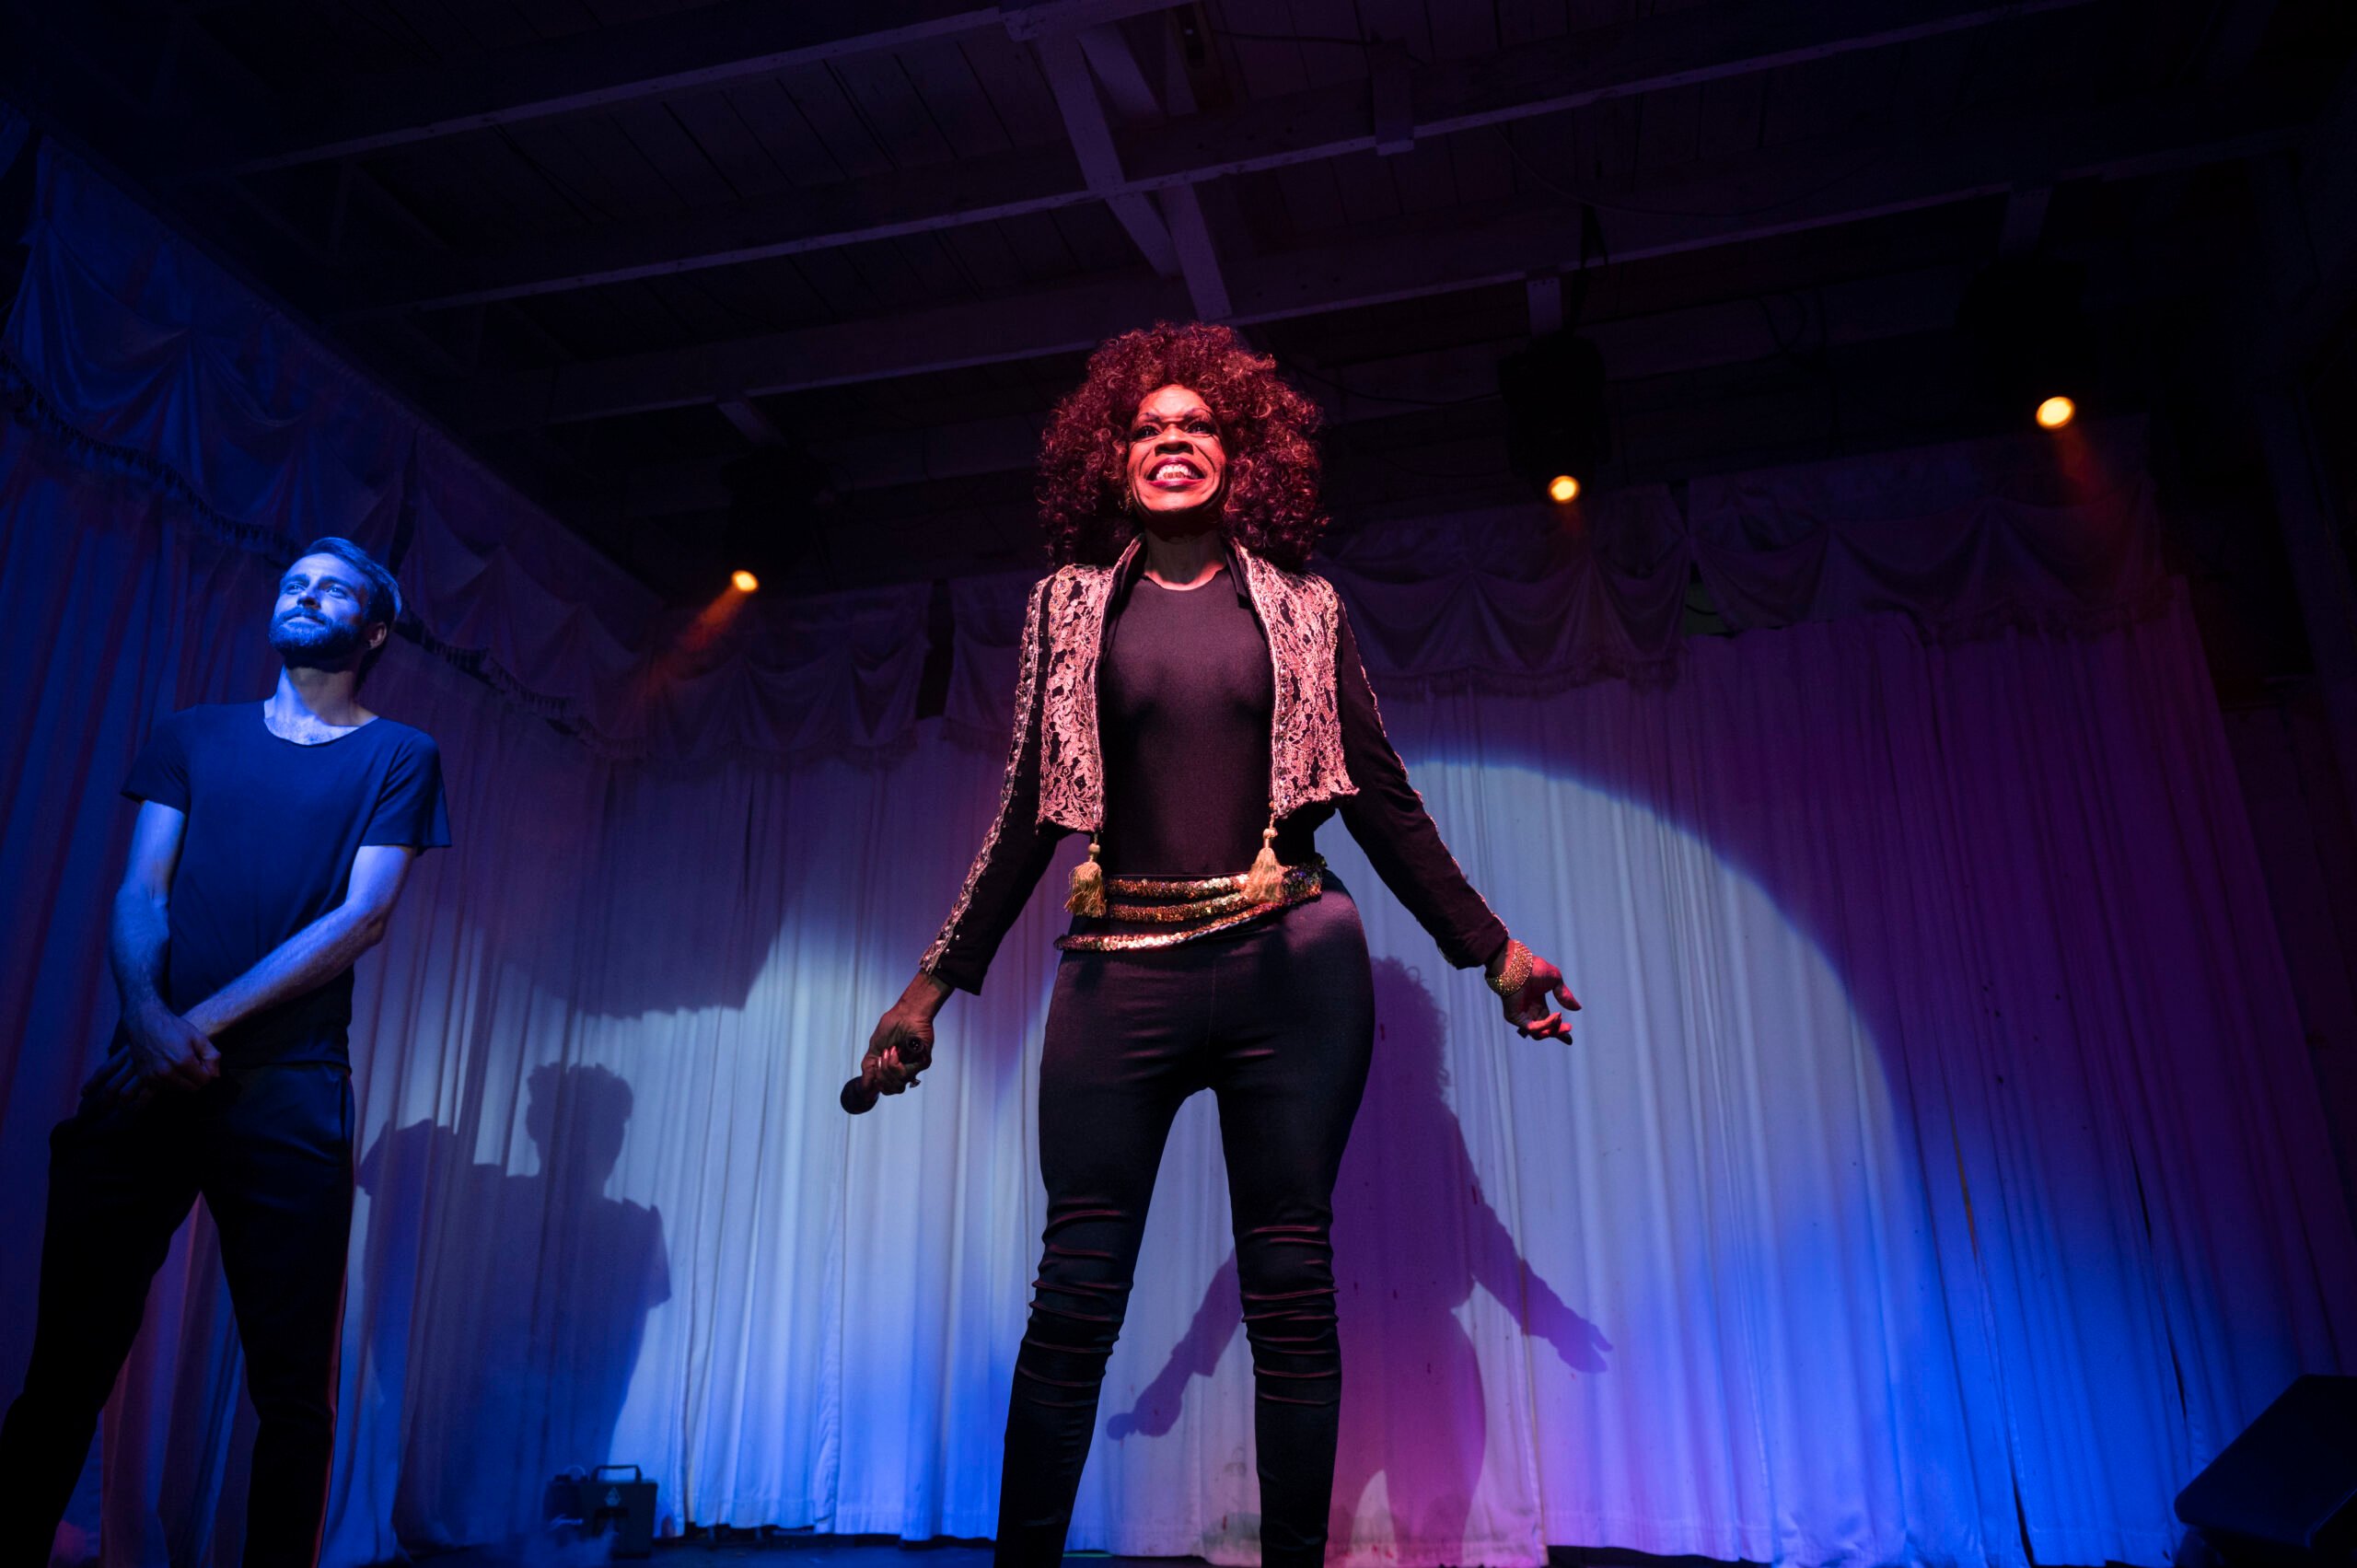 Ray Ray Topaz, an older Black drag queen who looks like Tina Turner, performs in a black outfit with pink and black jacket, standing with her arms spread wide behind her proudly, the microphone in one hand. The sign language interpreter stands to one side.